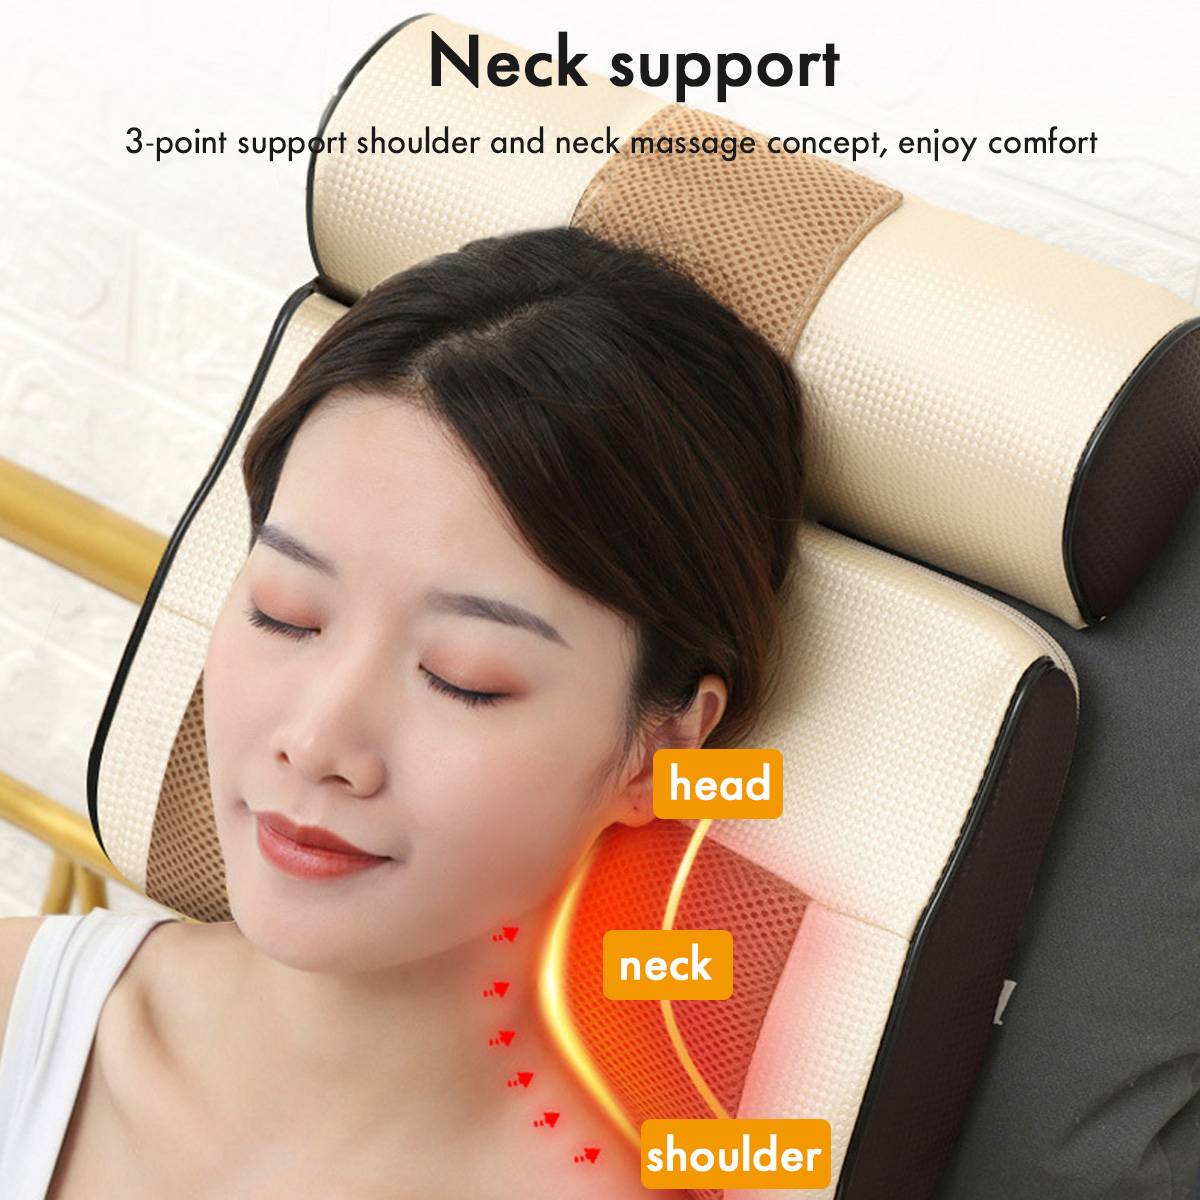 electric vibration heat neck support message relax 